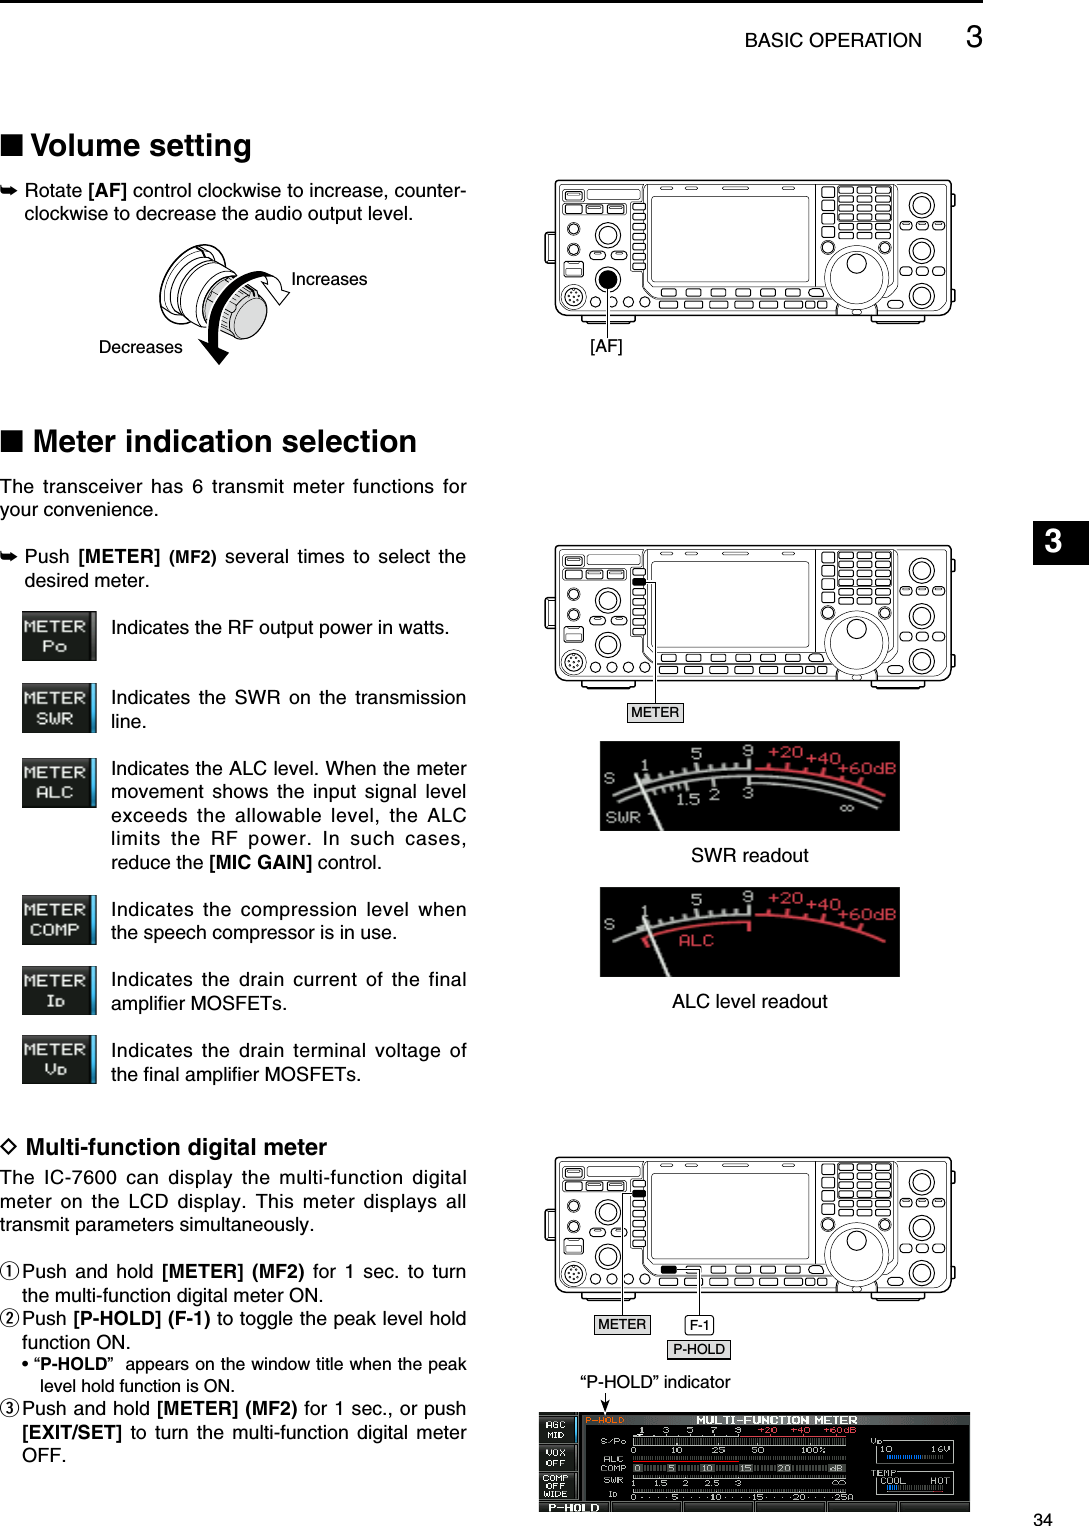 N Volume setting±  Rotate [AF] control clockwise to increase, counter-clockwise to decrease the audio output level.IncreasesDecreasesN Meter indication selectionThe transceiver has 6 transmit meter functions for your convenience.±  Push  [METER]  (MF2) several times to select the desired meter.   Indicates the RF output power in watts.   Indicates the SWR on the transmission line.   Indicates the ALC level. When the meter movement shows the input signal level exceeds the allowable level, the ALC limits the RF power. In such cases, reduce the [MIC GAIN] control.   Indicates the compression level when the speech compressor is in use.   Indicates the drain current of the final amplifier MOSFETs.   Indicates the drain terminal voltage of the final amplifier MOSFETs.D Multi-function digital meterThe IC-7600 can display the multi-function digital meter on the LCD display. This meter displays all transmit parameters simultaneously. q  Push and hold [METER] (MF2) for 1 sec. to turn the multi-function digital meter ON.w  Push [P-HOLD] (F-1) to toggle the peak level hold function ON. • “ P-HOLD”  appears on the window title when the peak level hold function is ON.e  Push and hold [METER] (MF2) for 1 sec., or push [EXIT/SET] to turn the multi-function digital meter OFF.[AF]METERSWR readoutALC level readoutF-1P-HOLDMETER“P-HOLD” indicator343BASIC OPERATION123456789101112131415161718192021